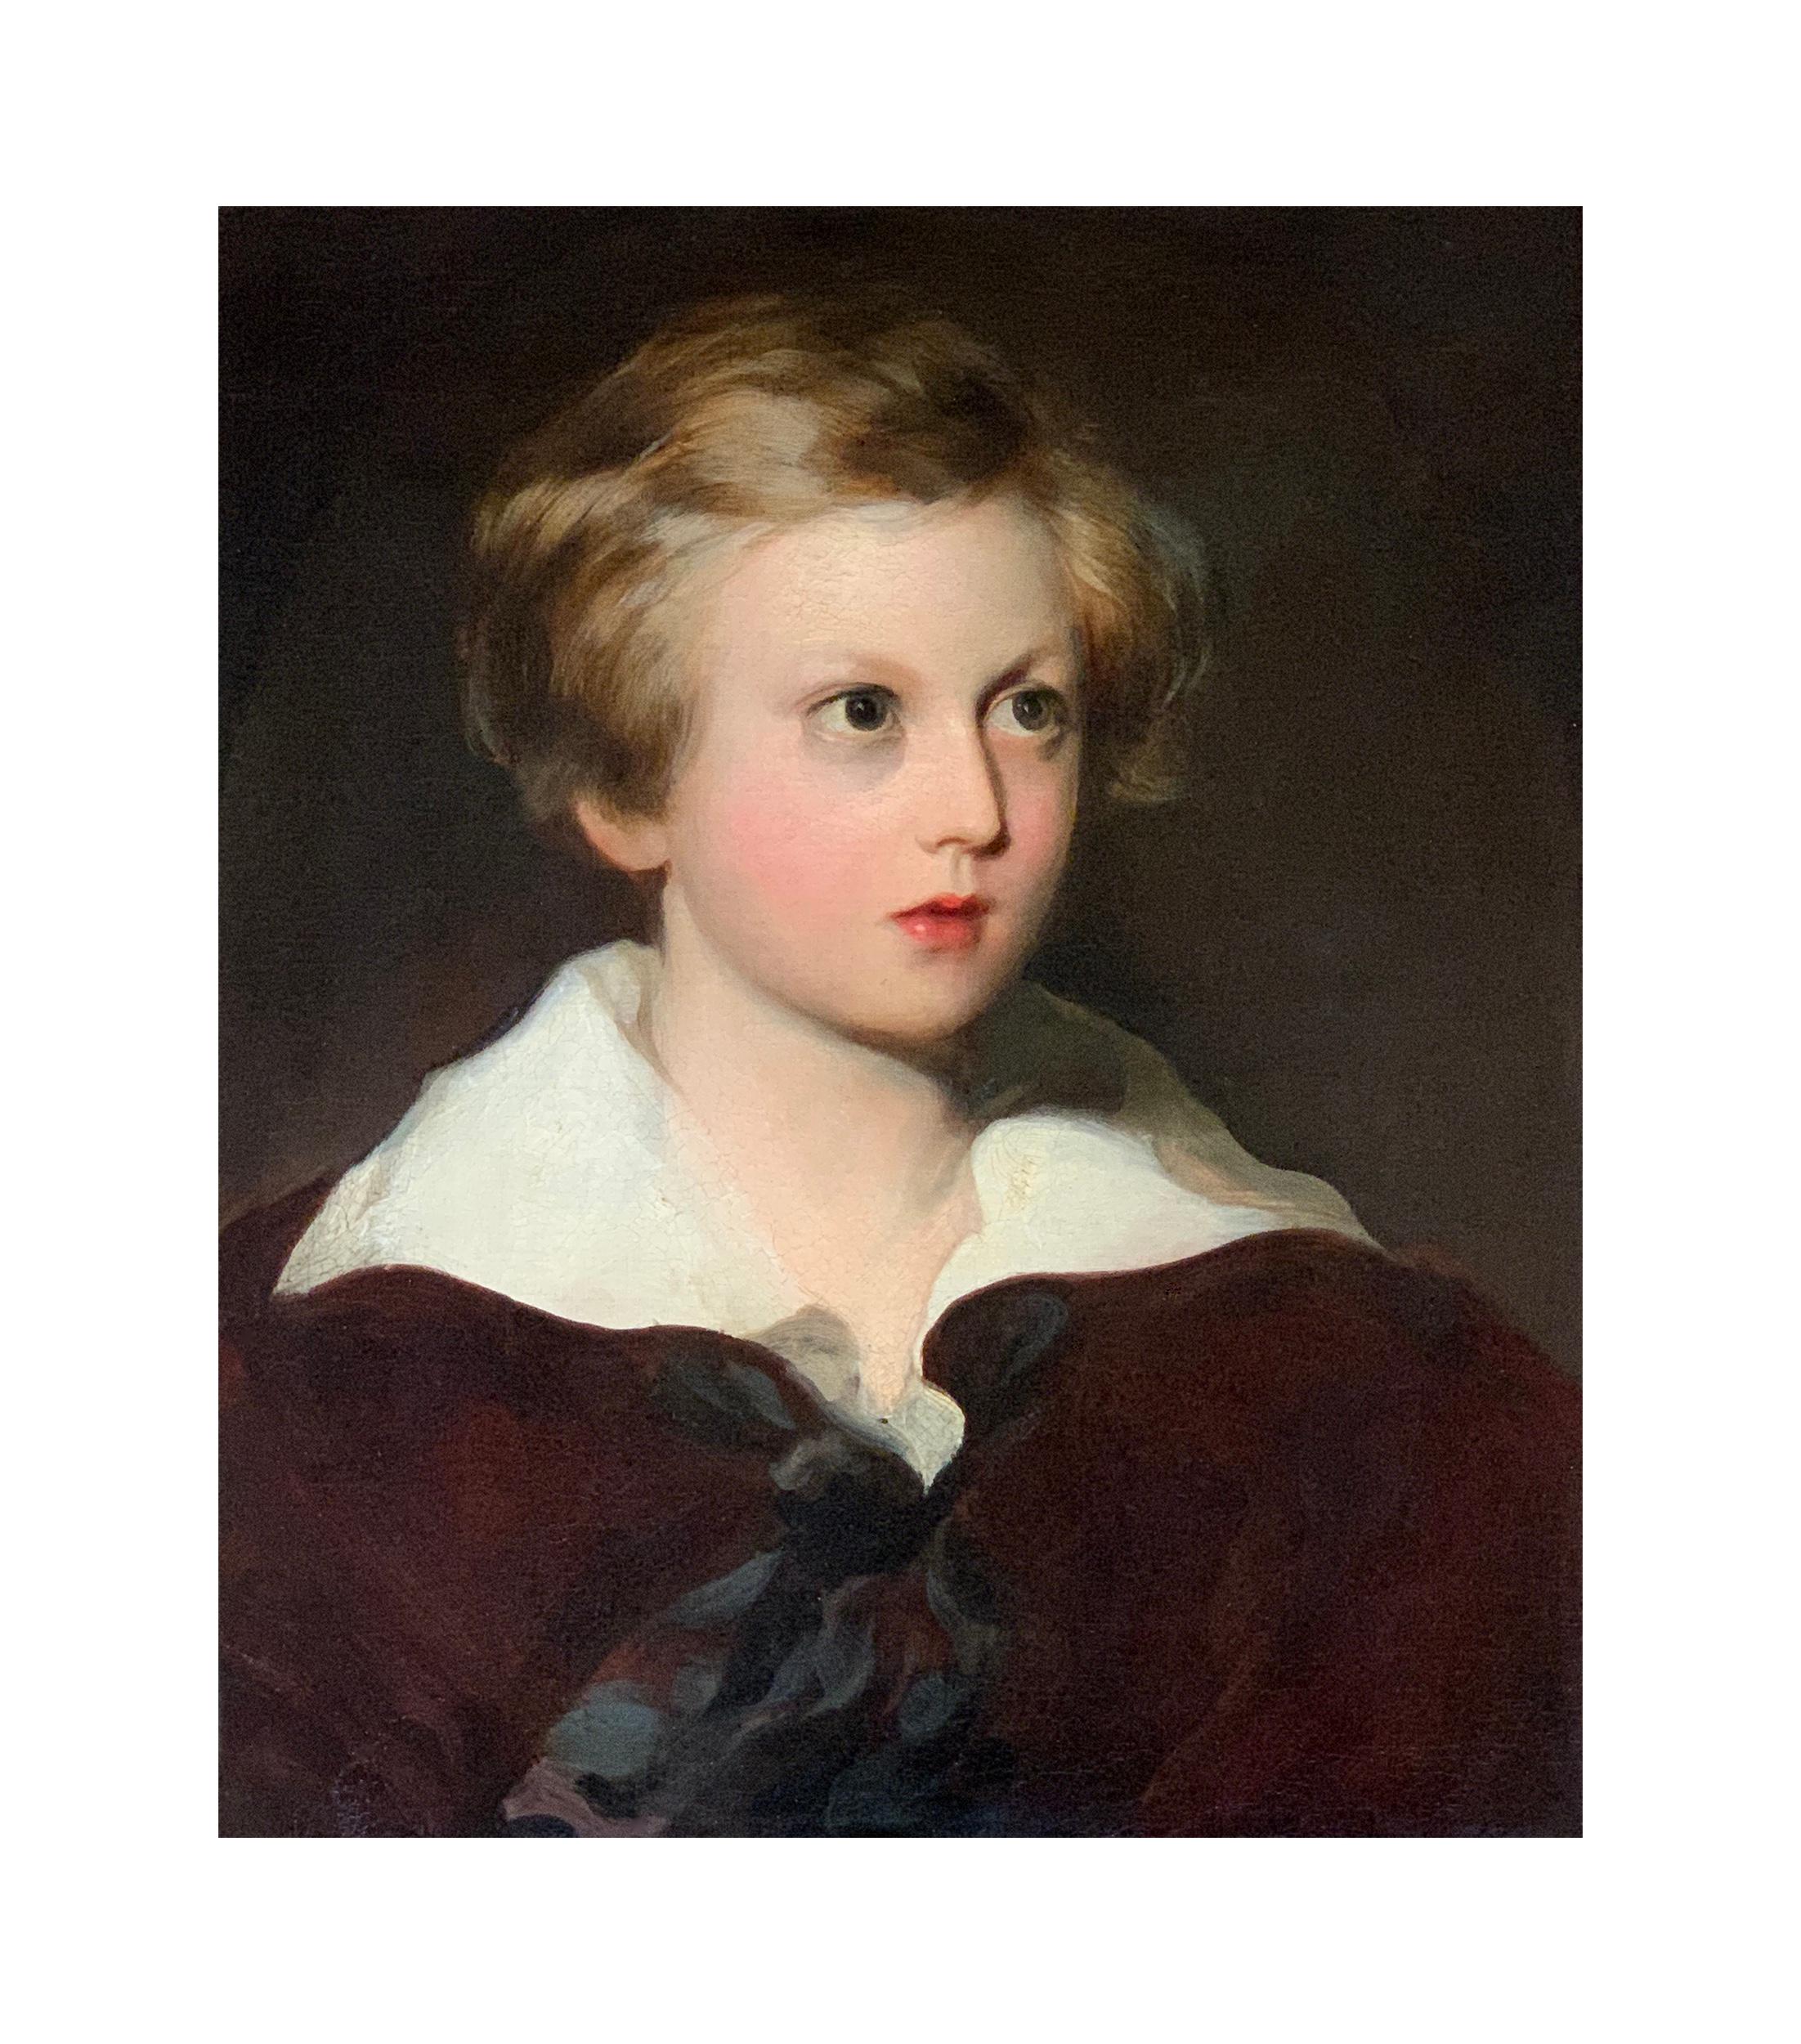 19th Century English Oil on Canvas Portrait of a Young Boy (Master Fletcher) - Painting by George Henry Harlow